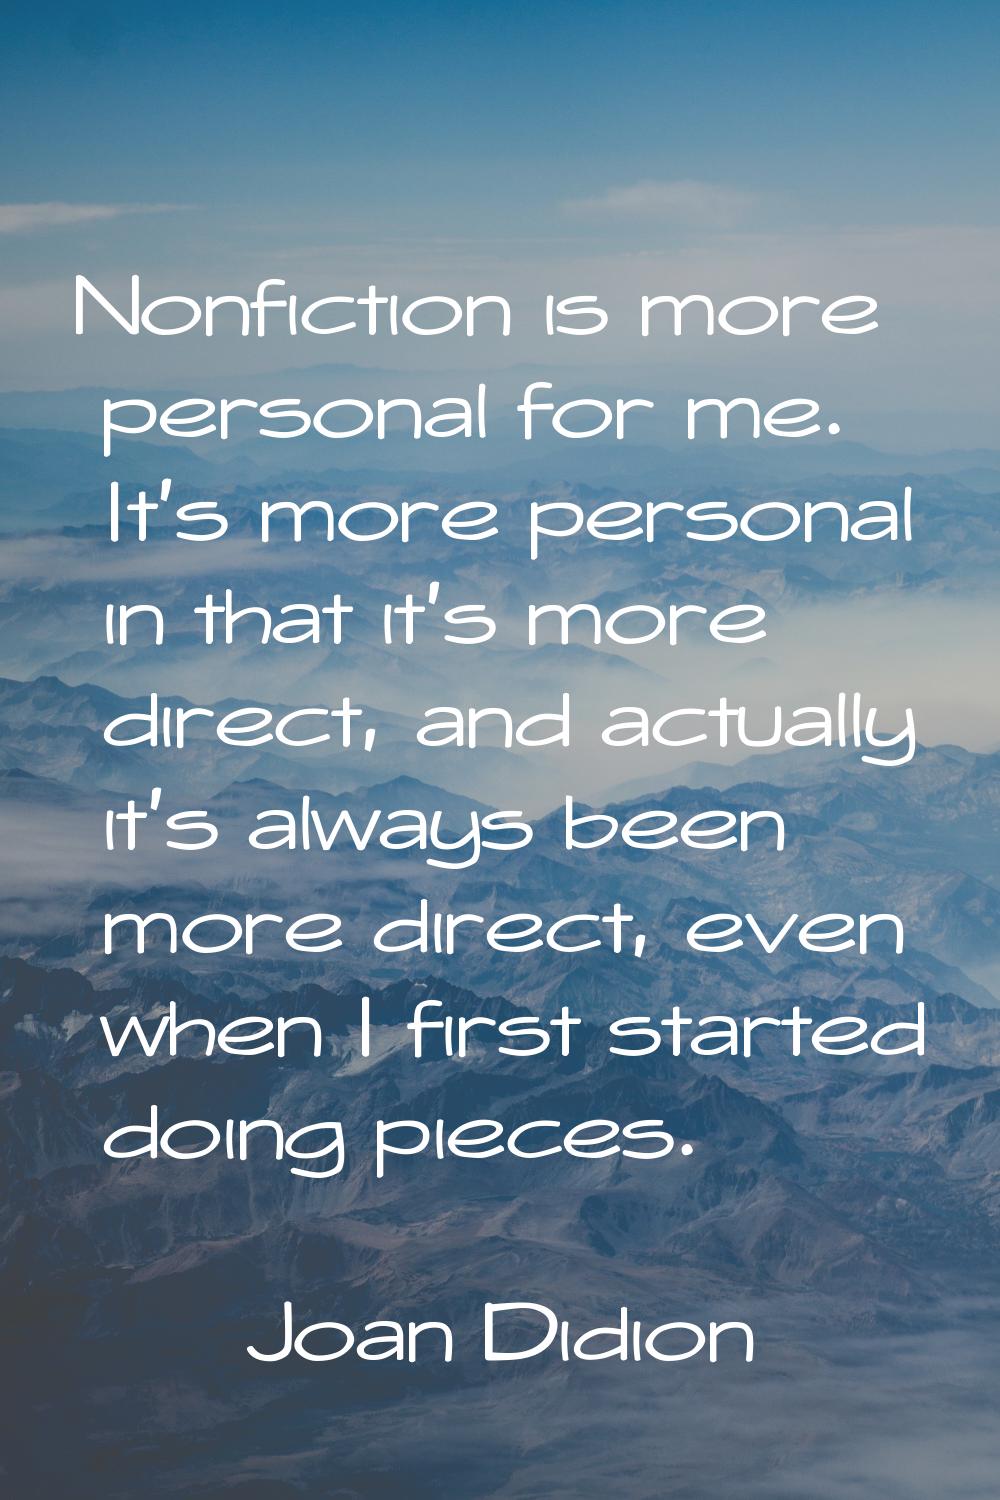 Nonfiction is more personal for me. It's more personal in that it's more direct, and actually it's 